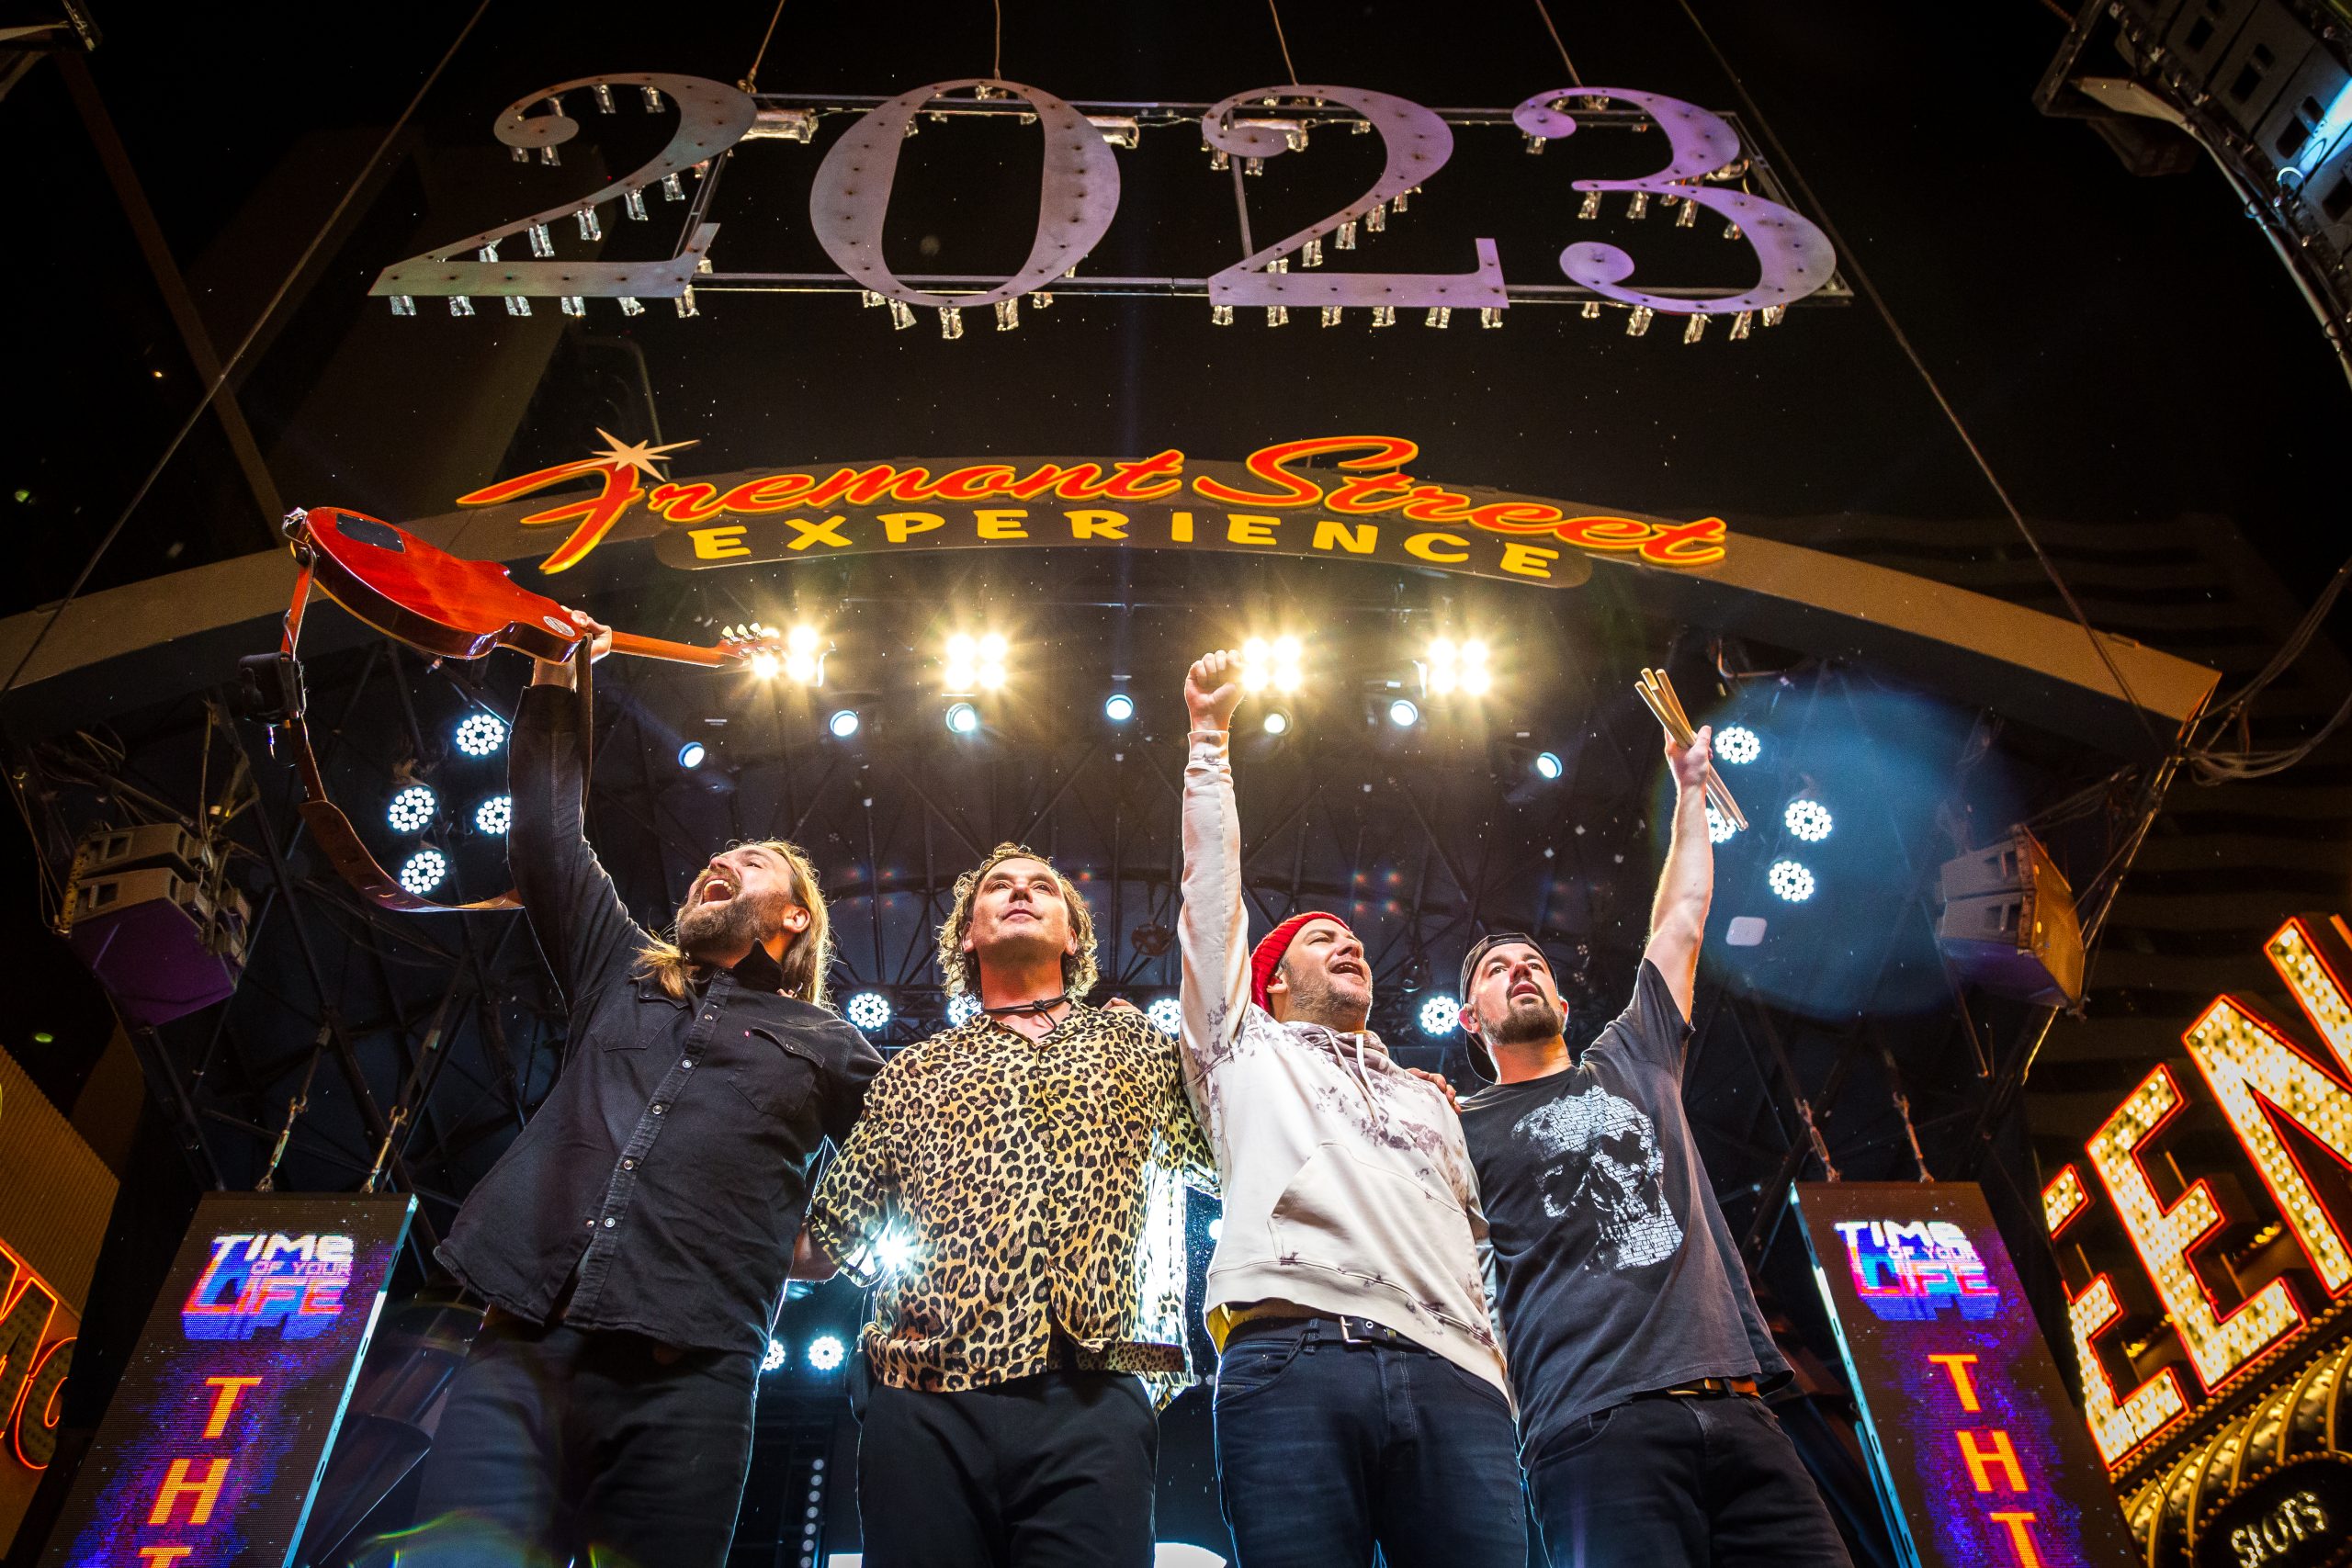 Recap: Fremont Street Experience NYE Time of Your Life Festival